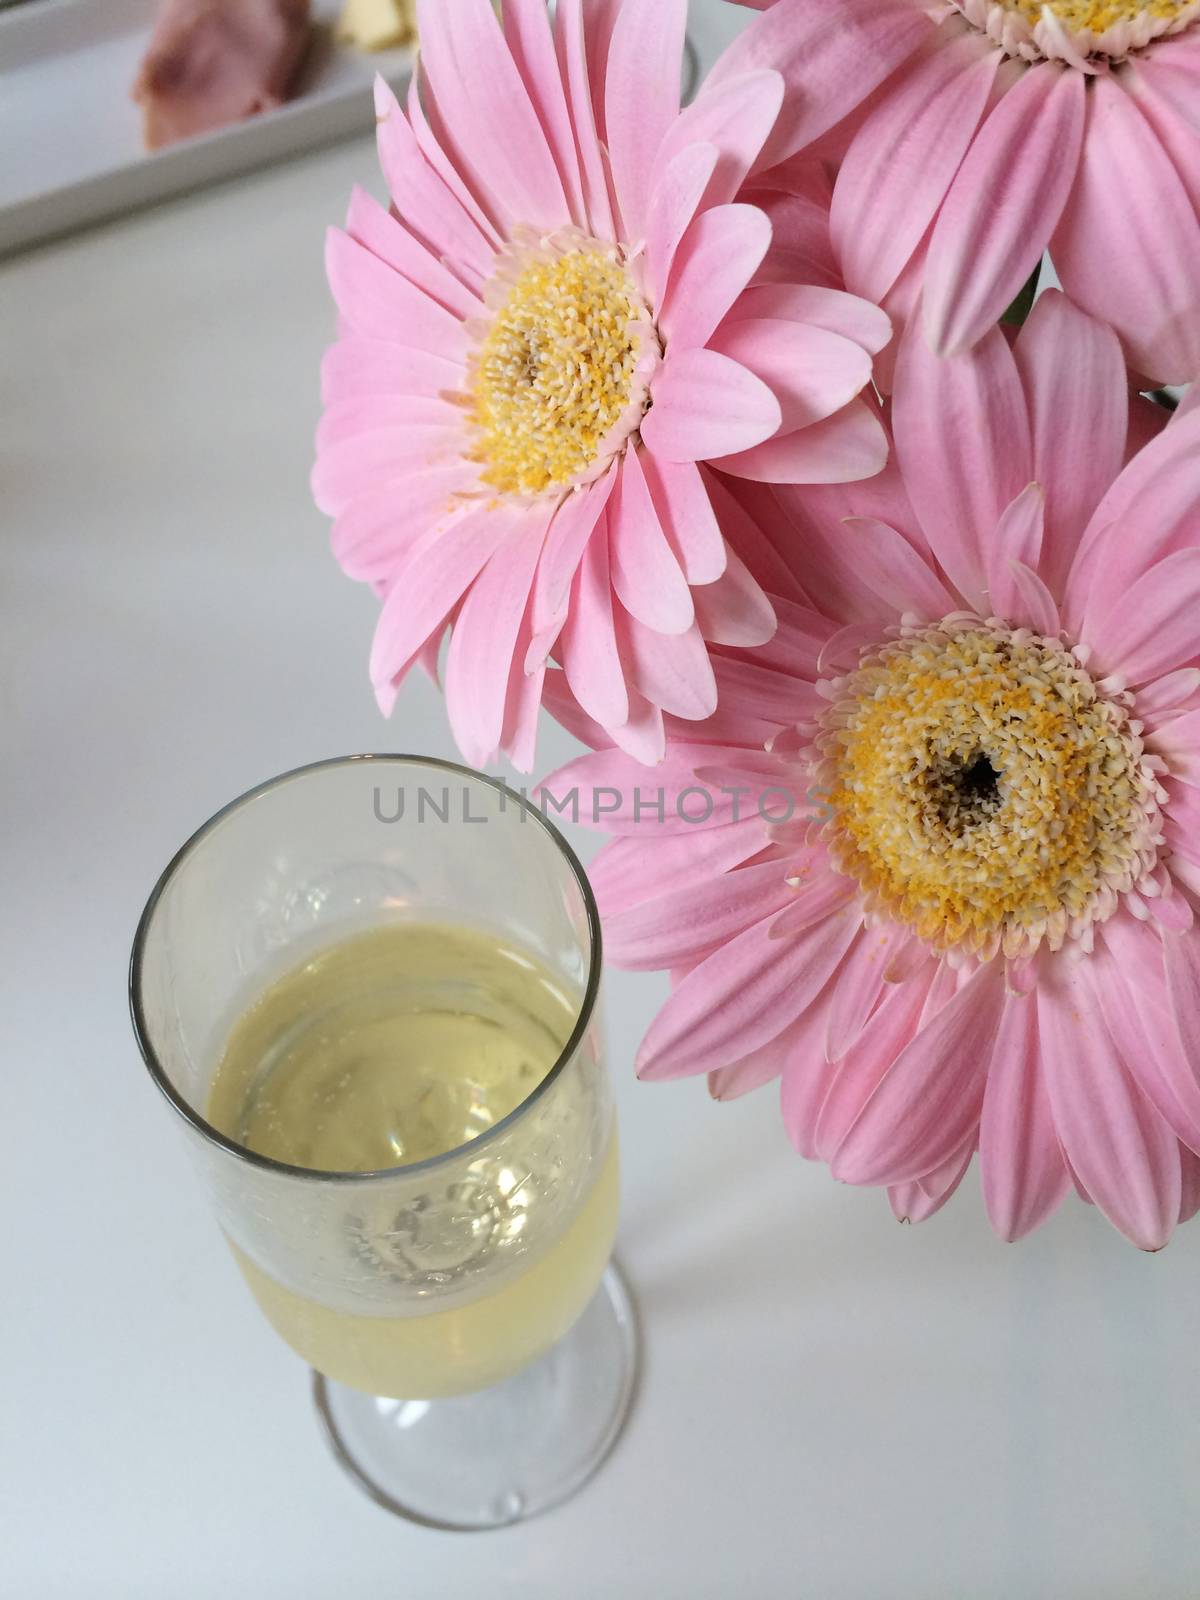 A glass of champagne and pink daisies on a white surface 